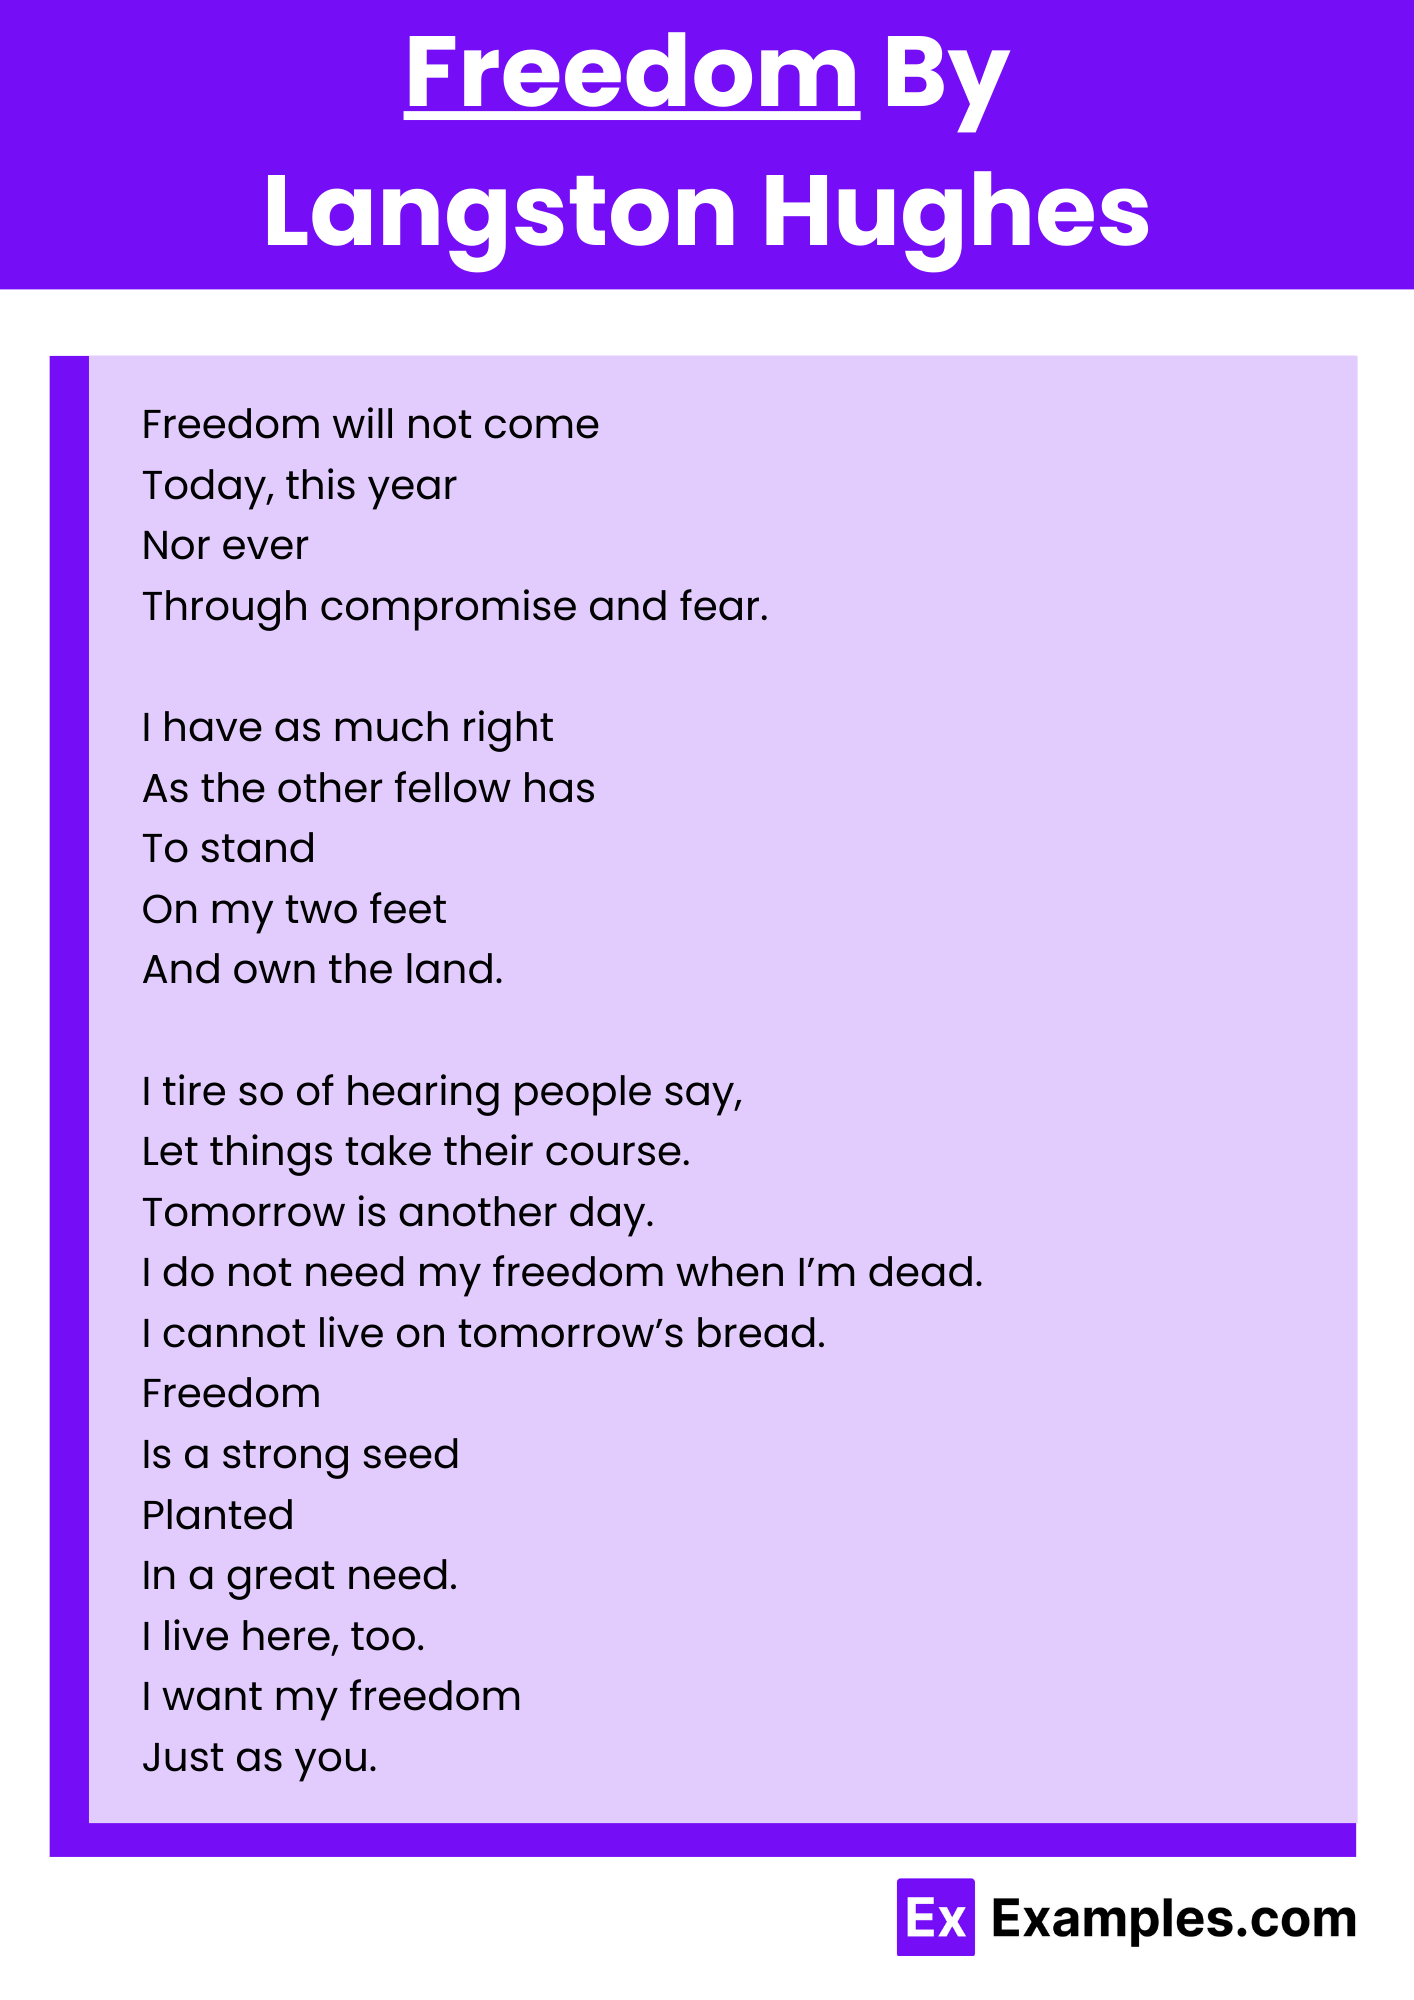 Freedom By Langston Hughes